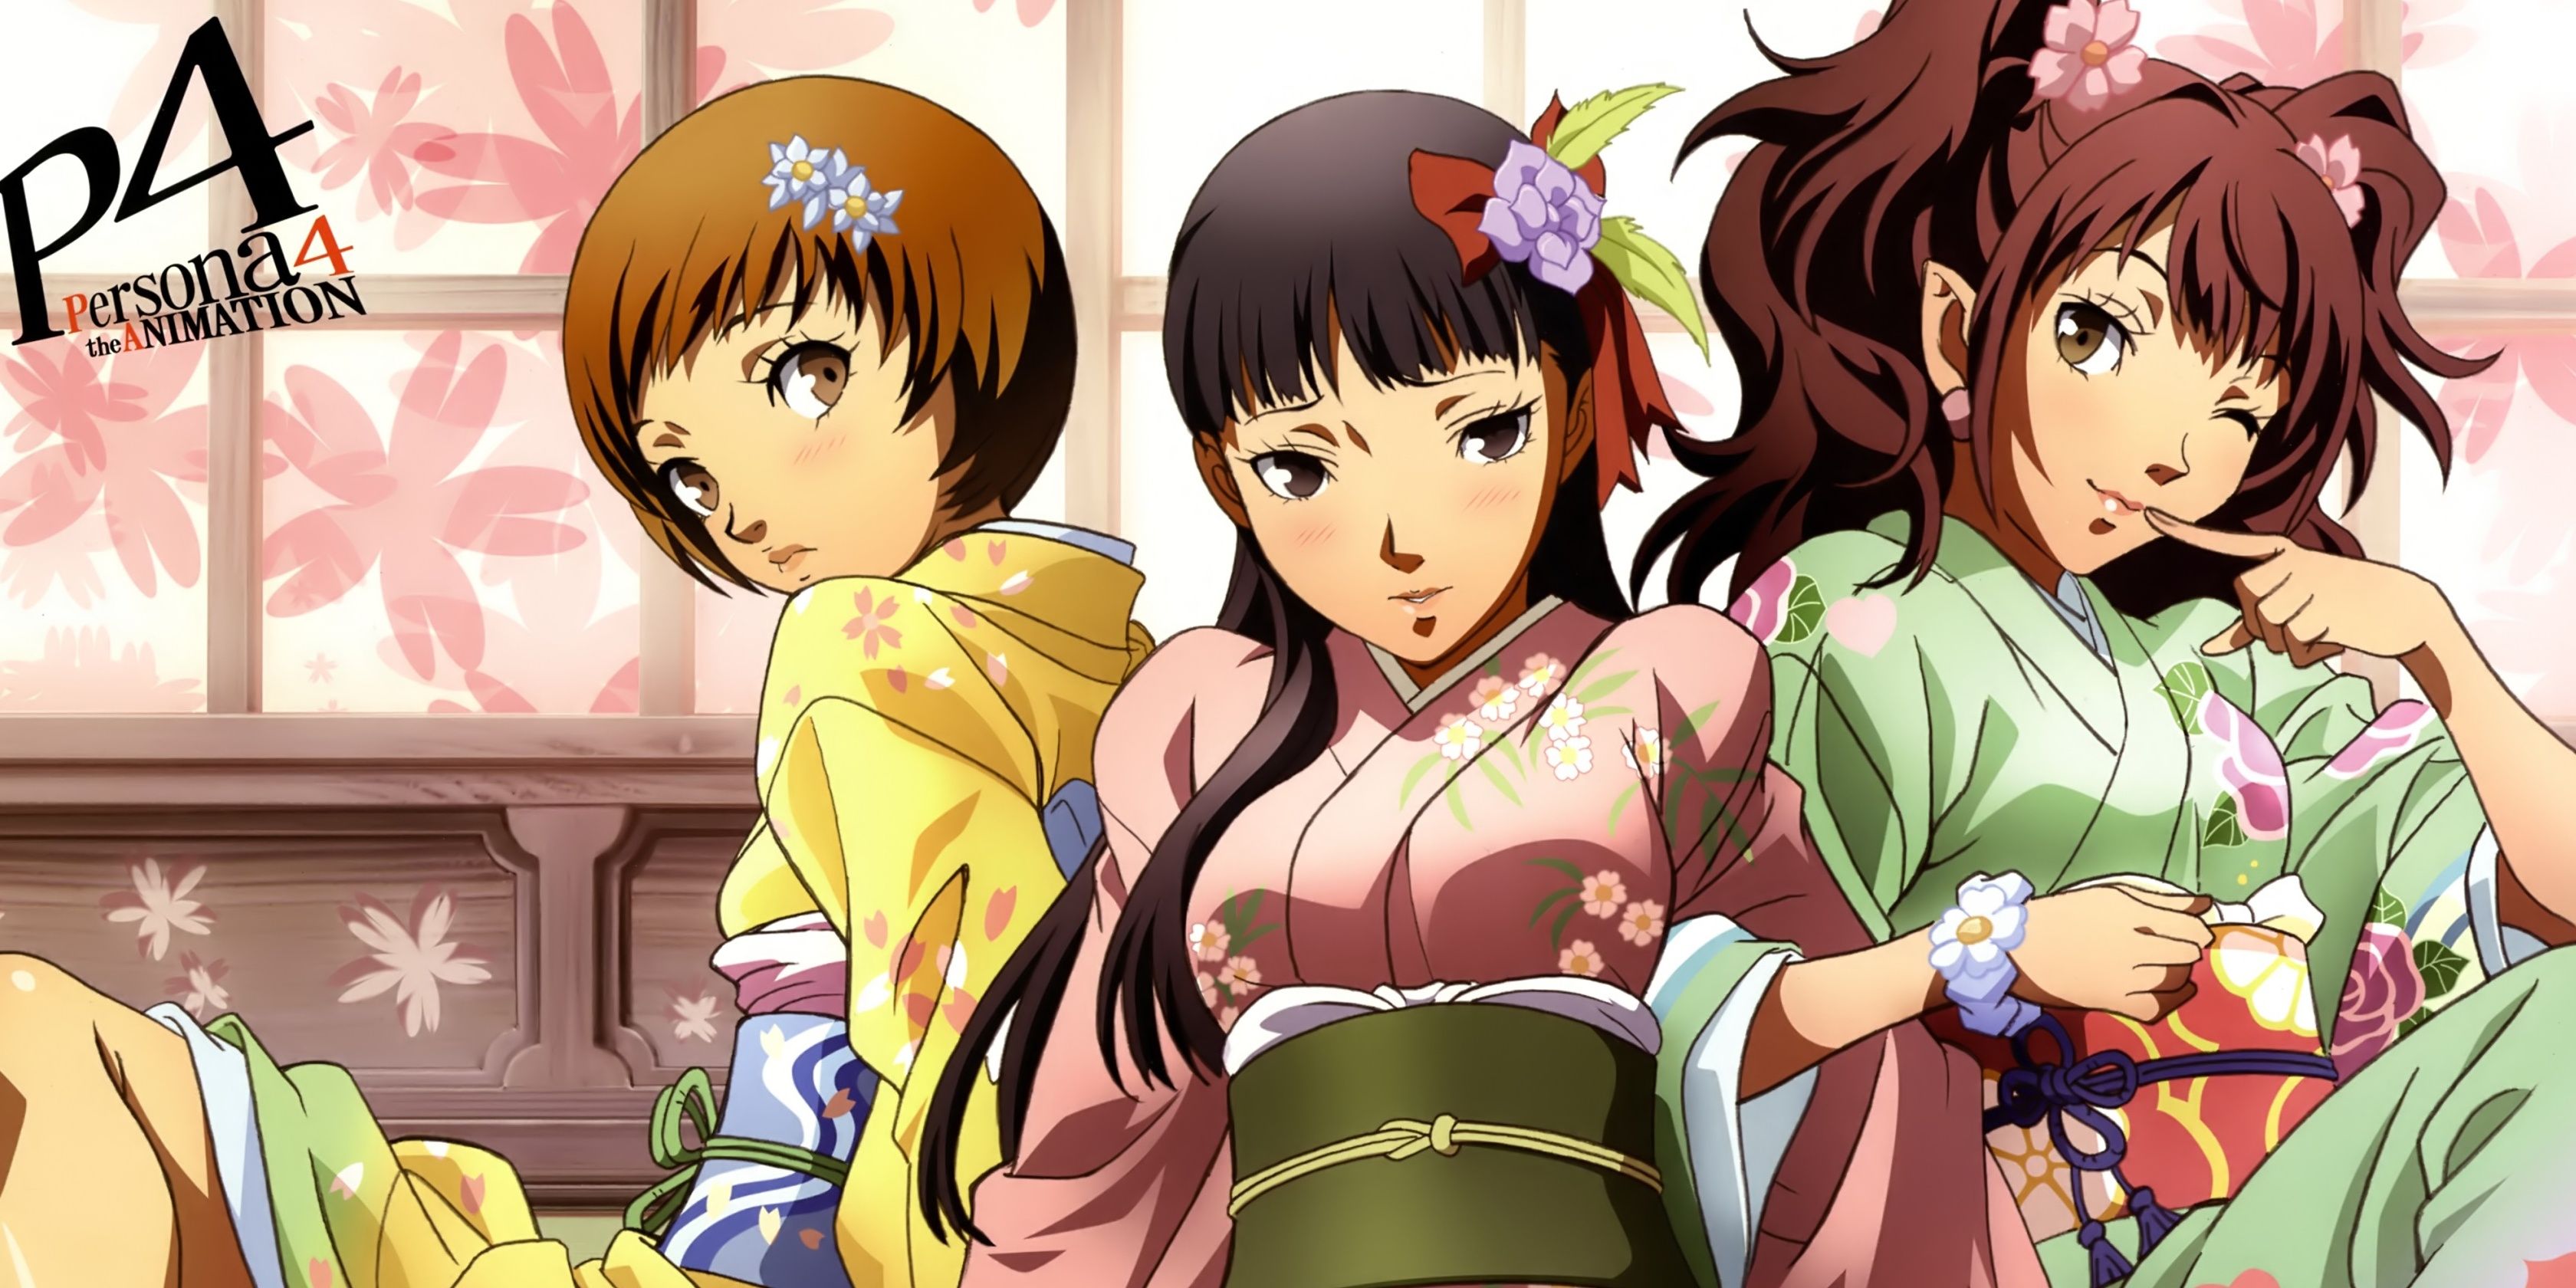 The female party members of Persona 4